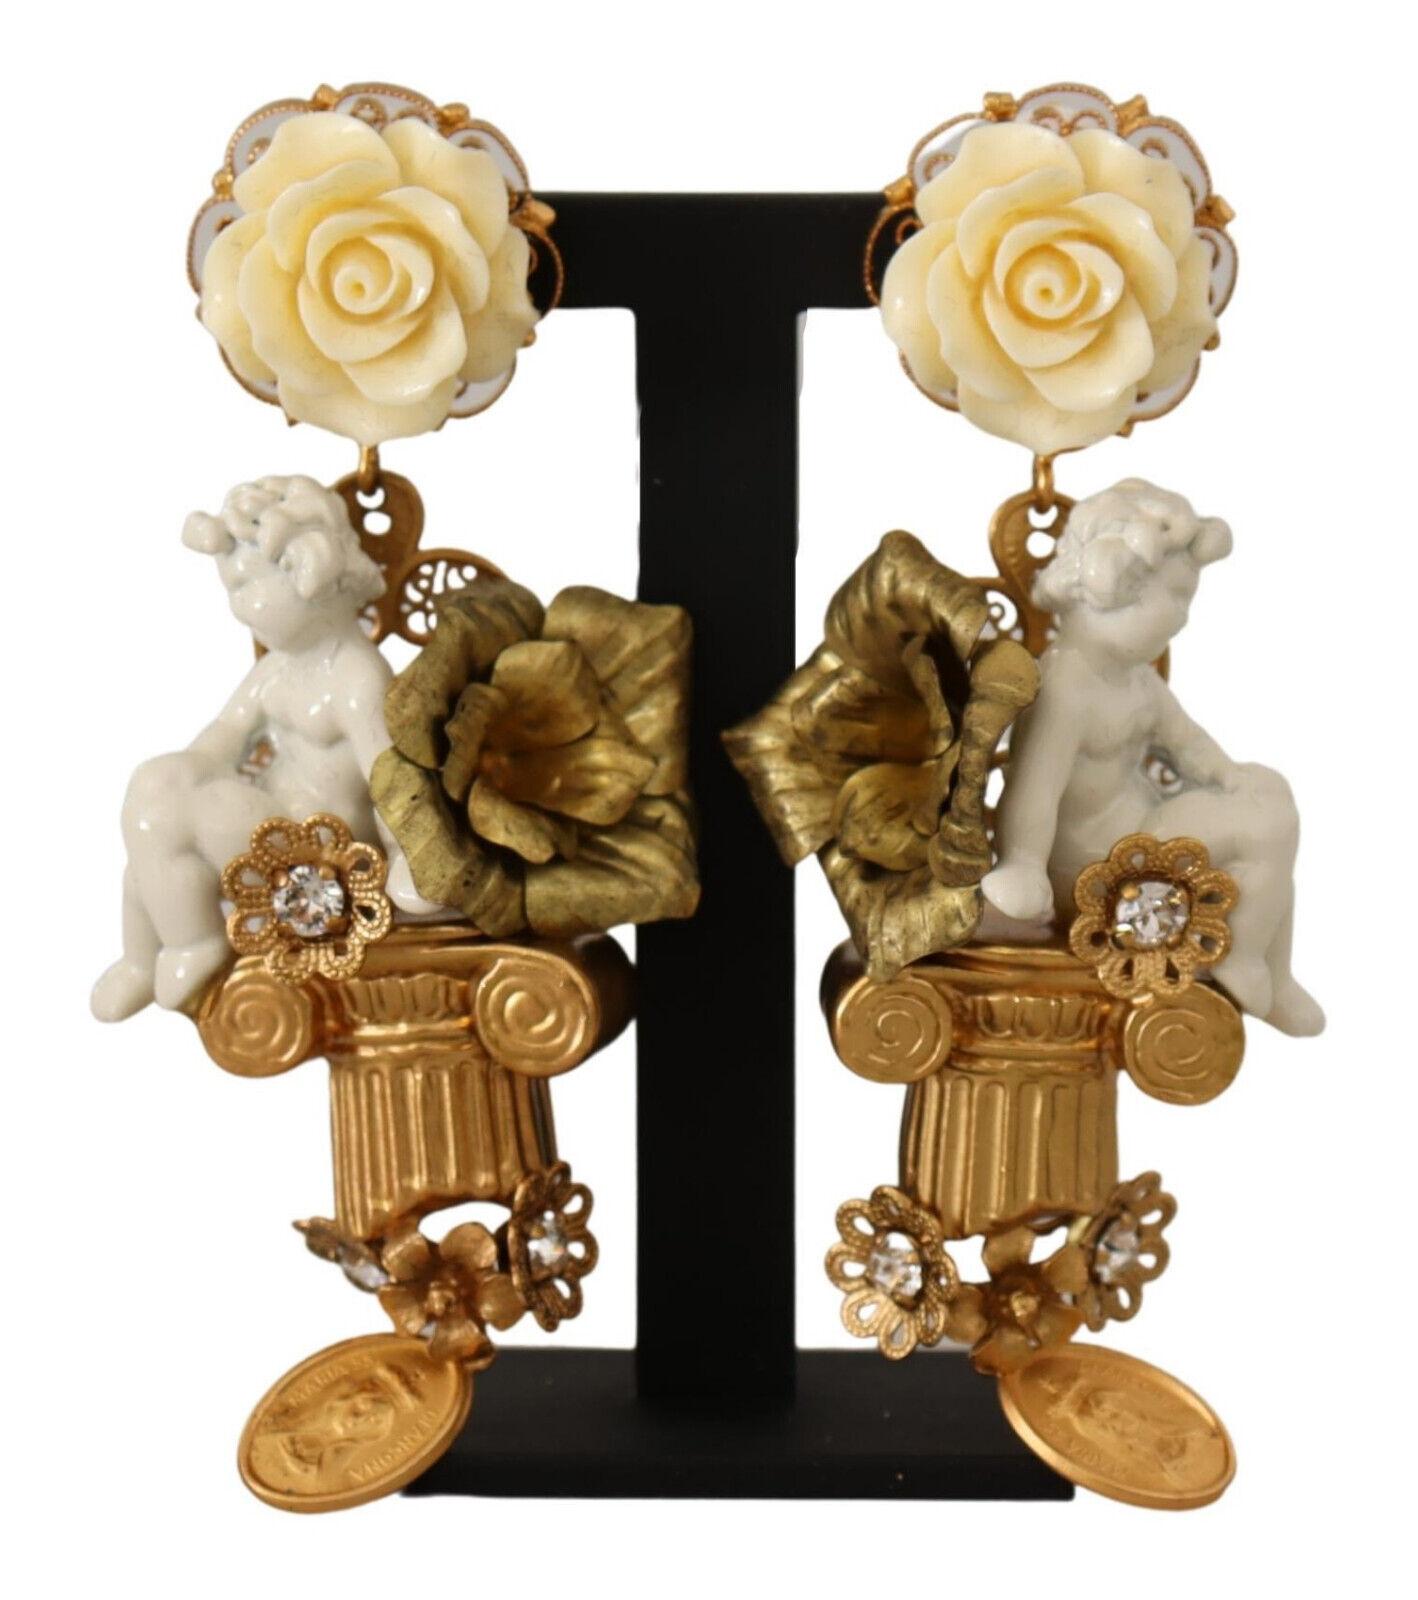 DOLCE & GABBANA

Gorgeous brand new with tags, 100% Authentic Dolce & Gabbana Earrings.

Model: Clip-on Dangling
Motive: Angel Roses
Material: 75% Brass, 20% VT, 5% Crystal

Color: Gold
Clear crystals

Logo details
Made in Italy

Length: 9cm

Dolce